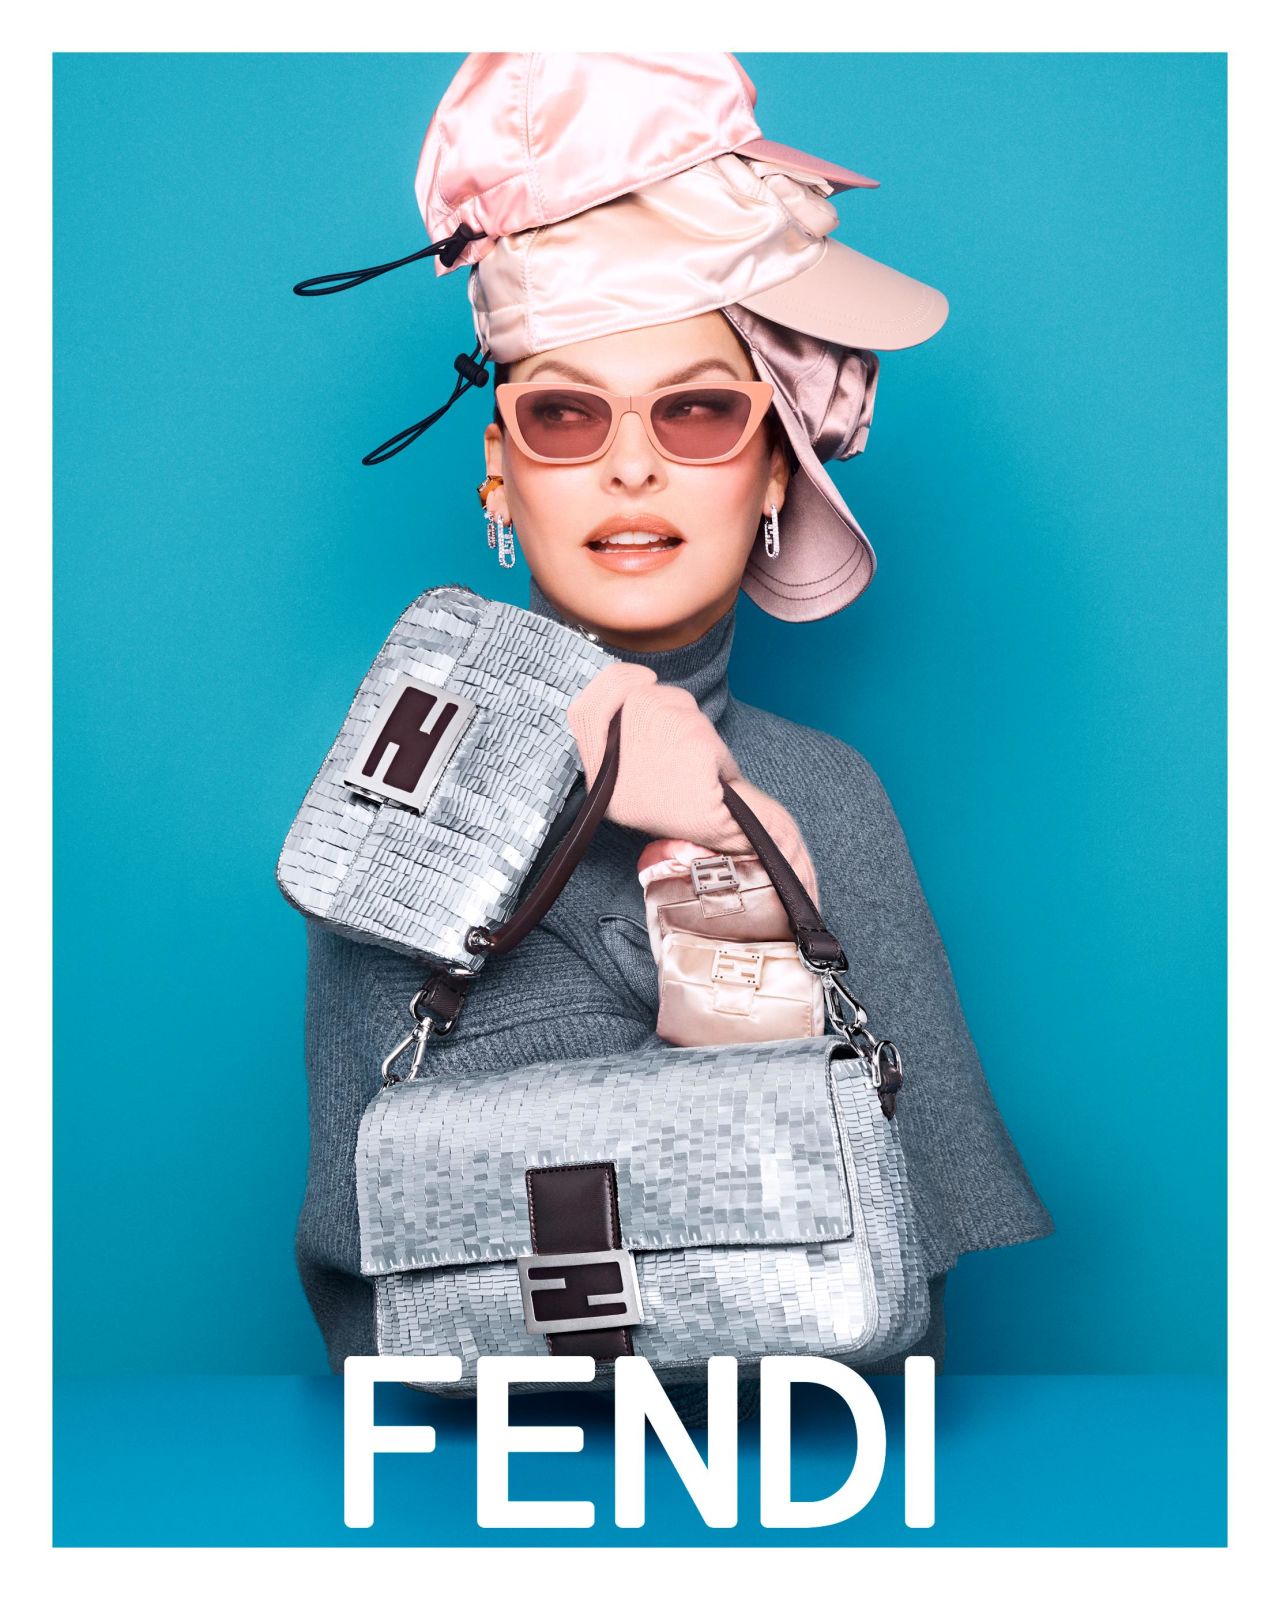 Linda Evangelista in a new campaign for Fendi unveiled this week, her first modeling job since claiming she was "disfigured" by a fat-freezing treatment called CoolSculpt in 2021. The image, shot by Steven Meisel, is in celebratation of the Fendi Baguette bag's 25th anniversary, designed by Silvia Venturini Fendi.